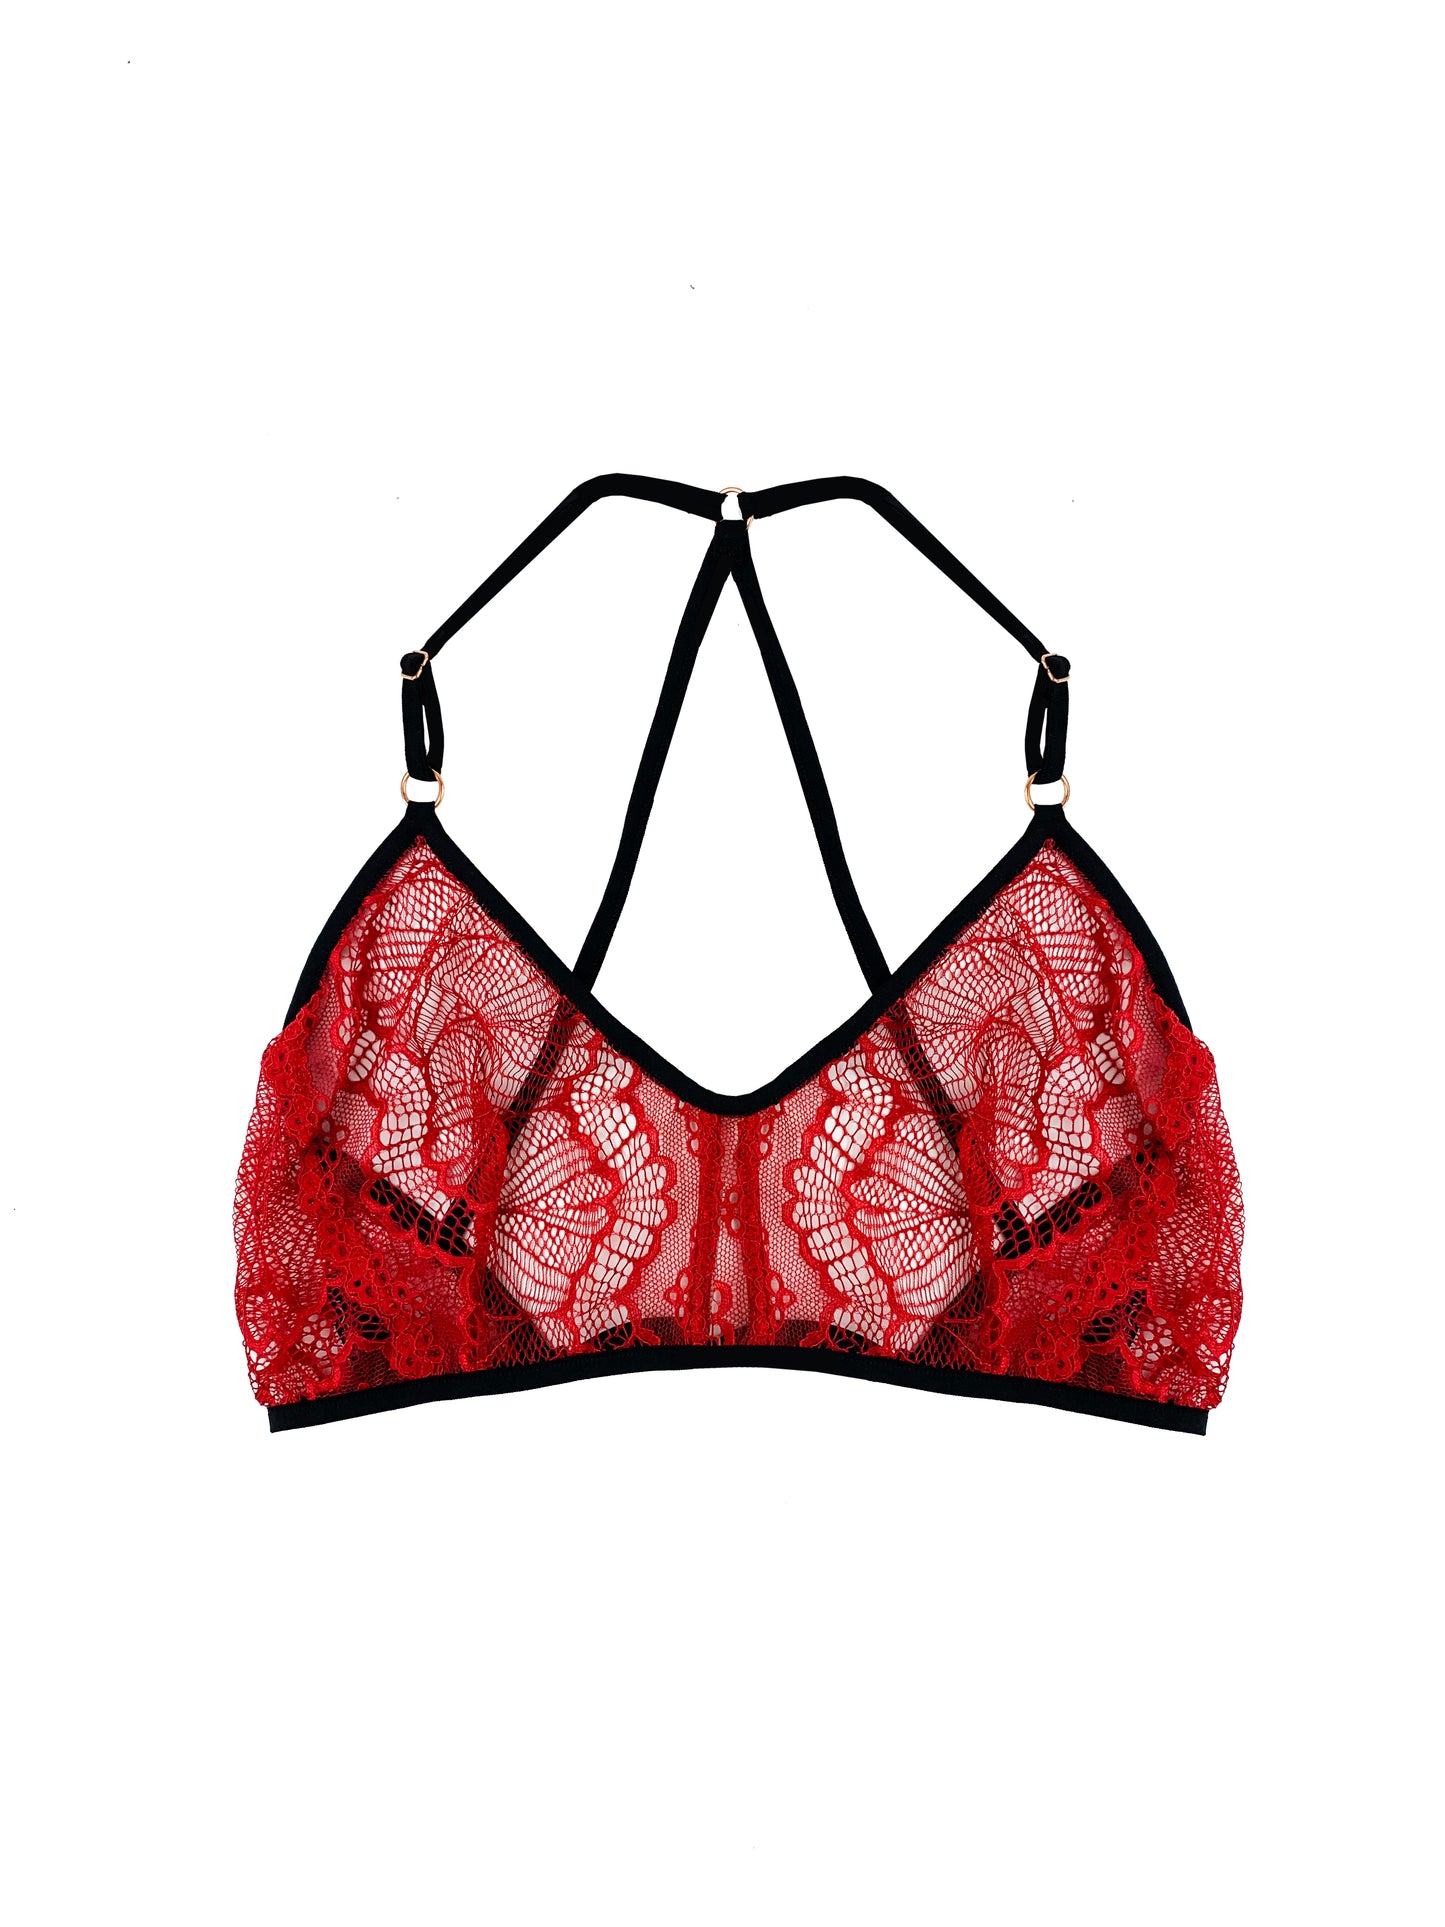 red lace bra with white backdrop 